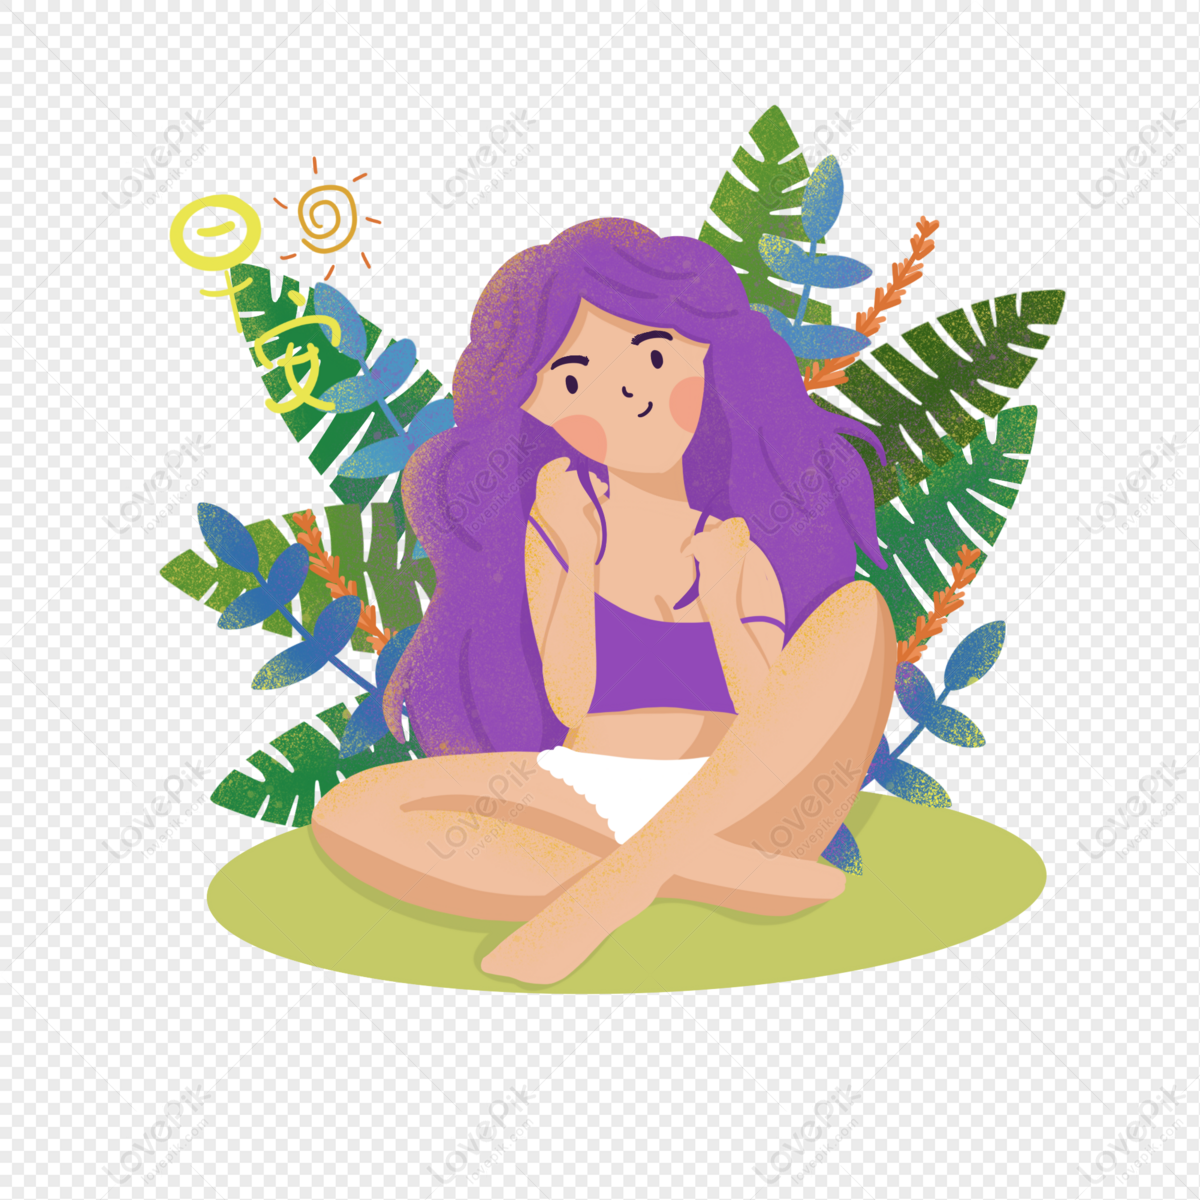 Girl Doing Yoga In Summer PNG Transparent Background And Clipart Image ...